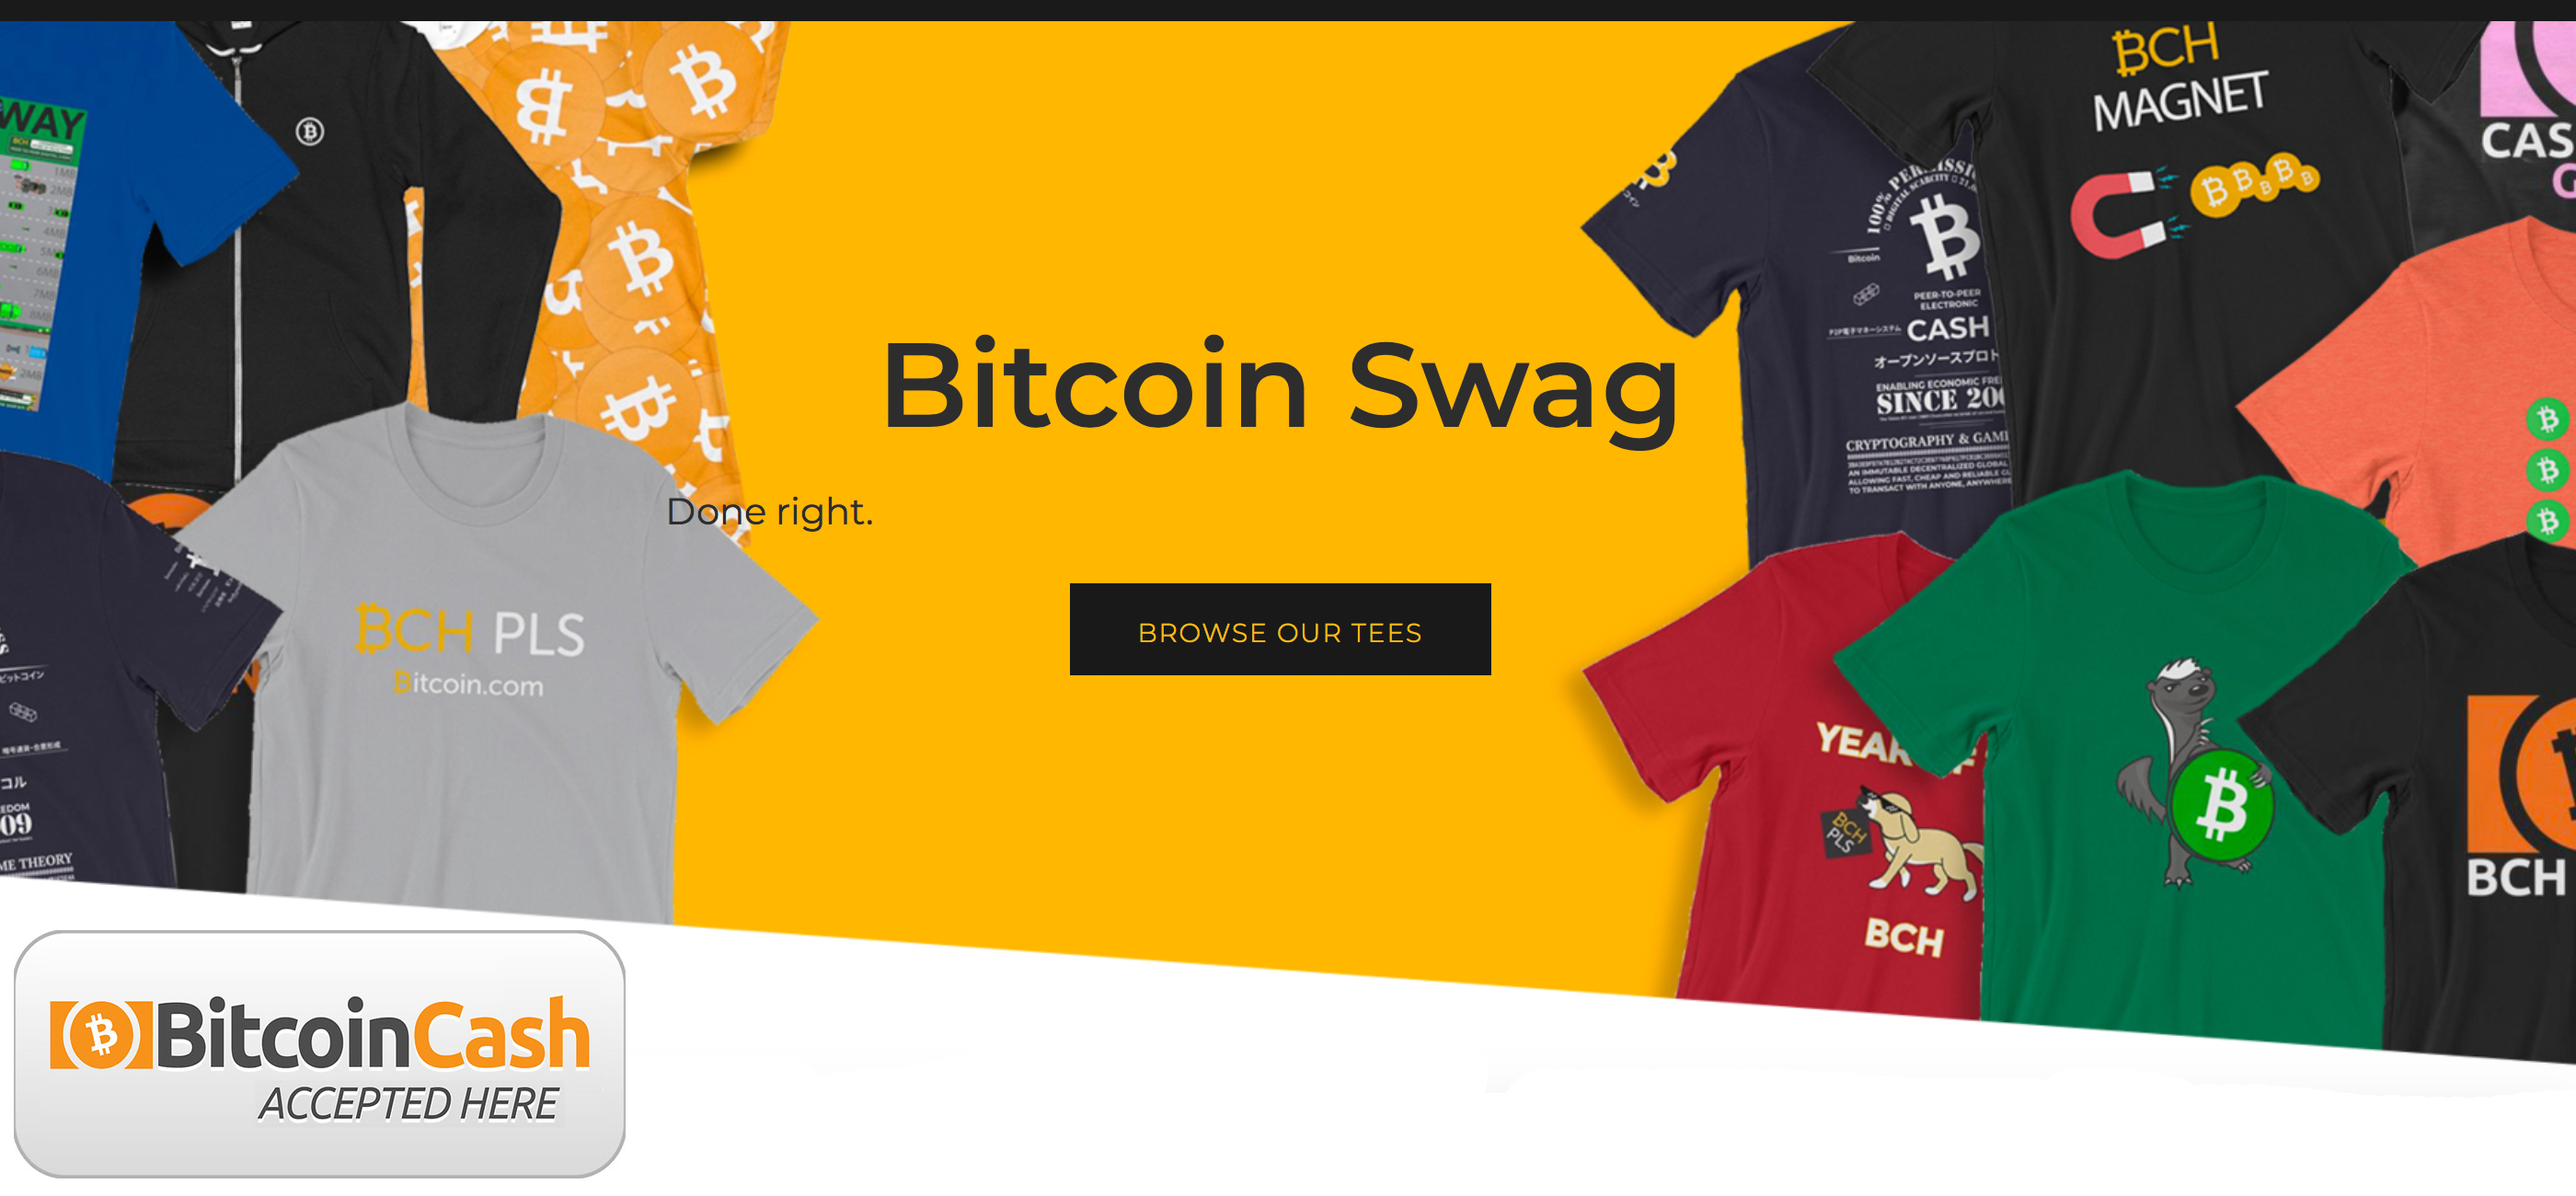 Bitcoin.com Store Now Offers Hundreds of Top-Branded Gift Cards 